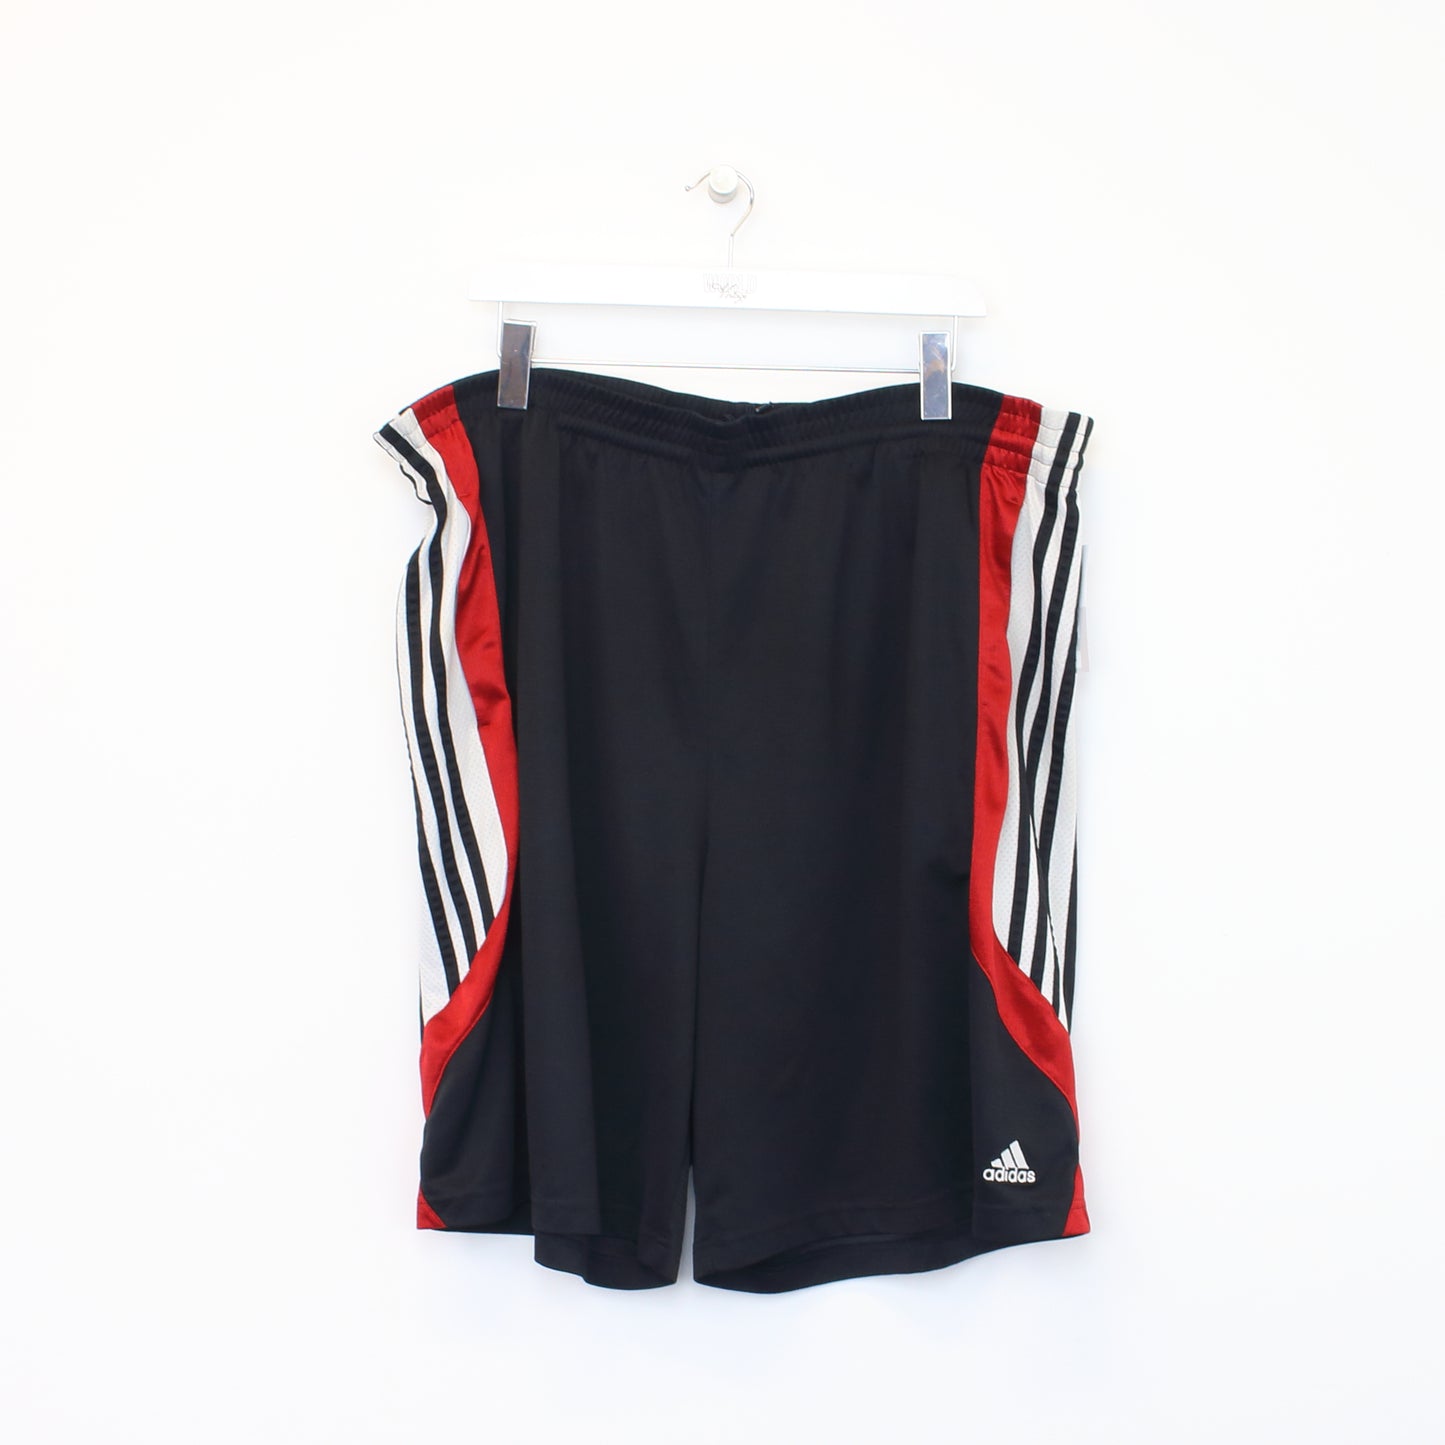 Vintage Adidas shorts in black and red. Best fits XXL